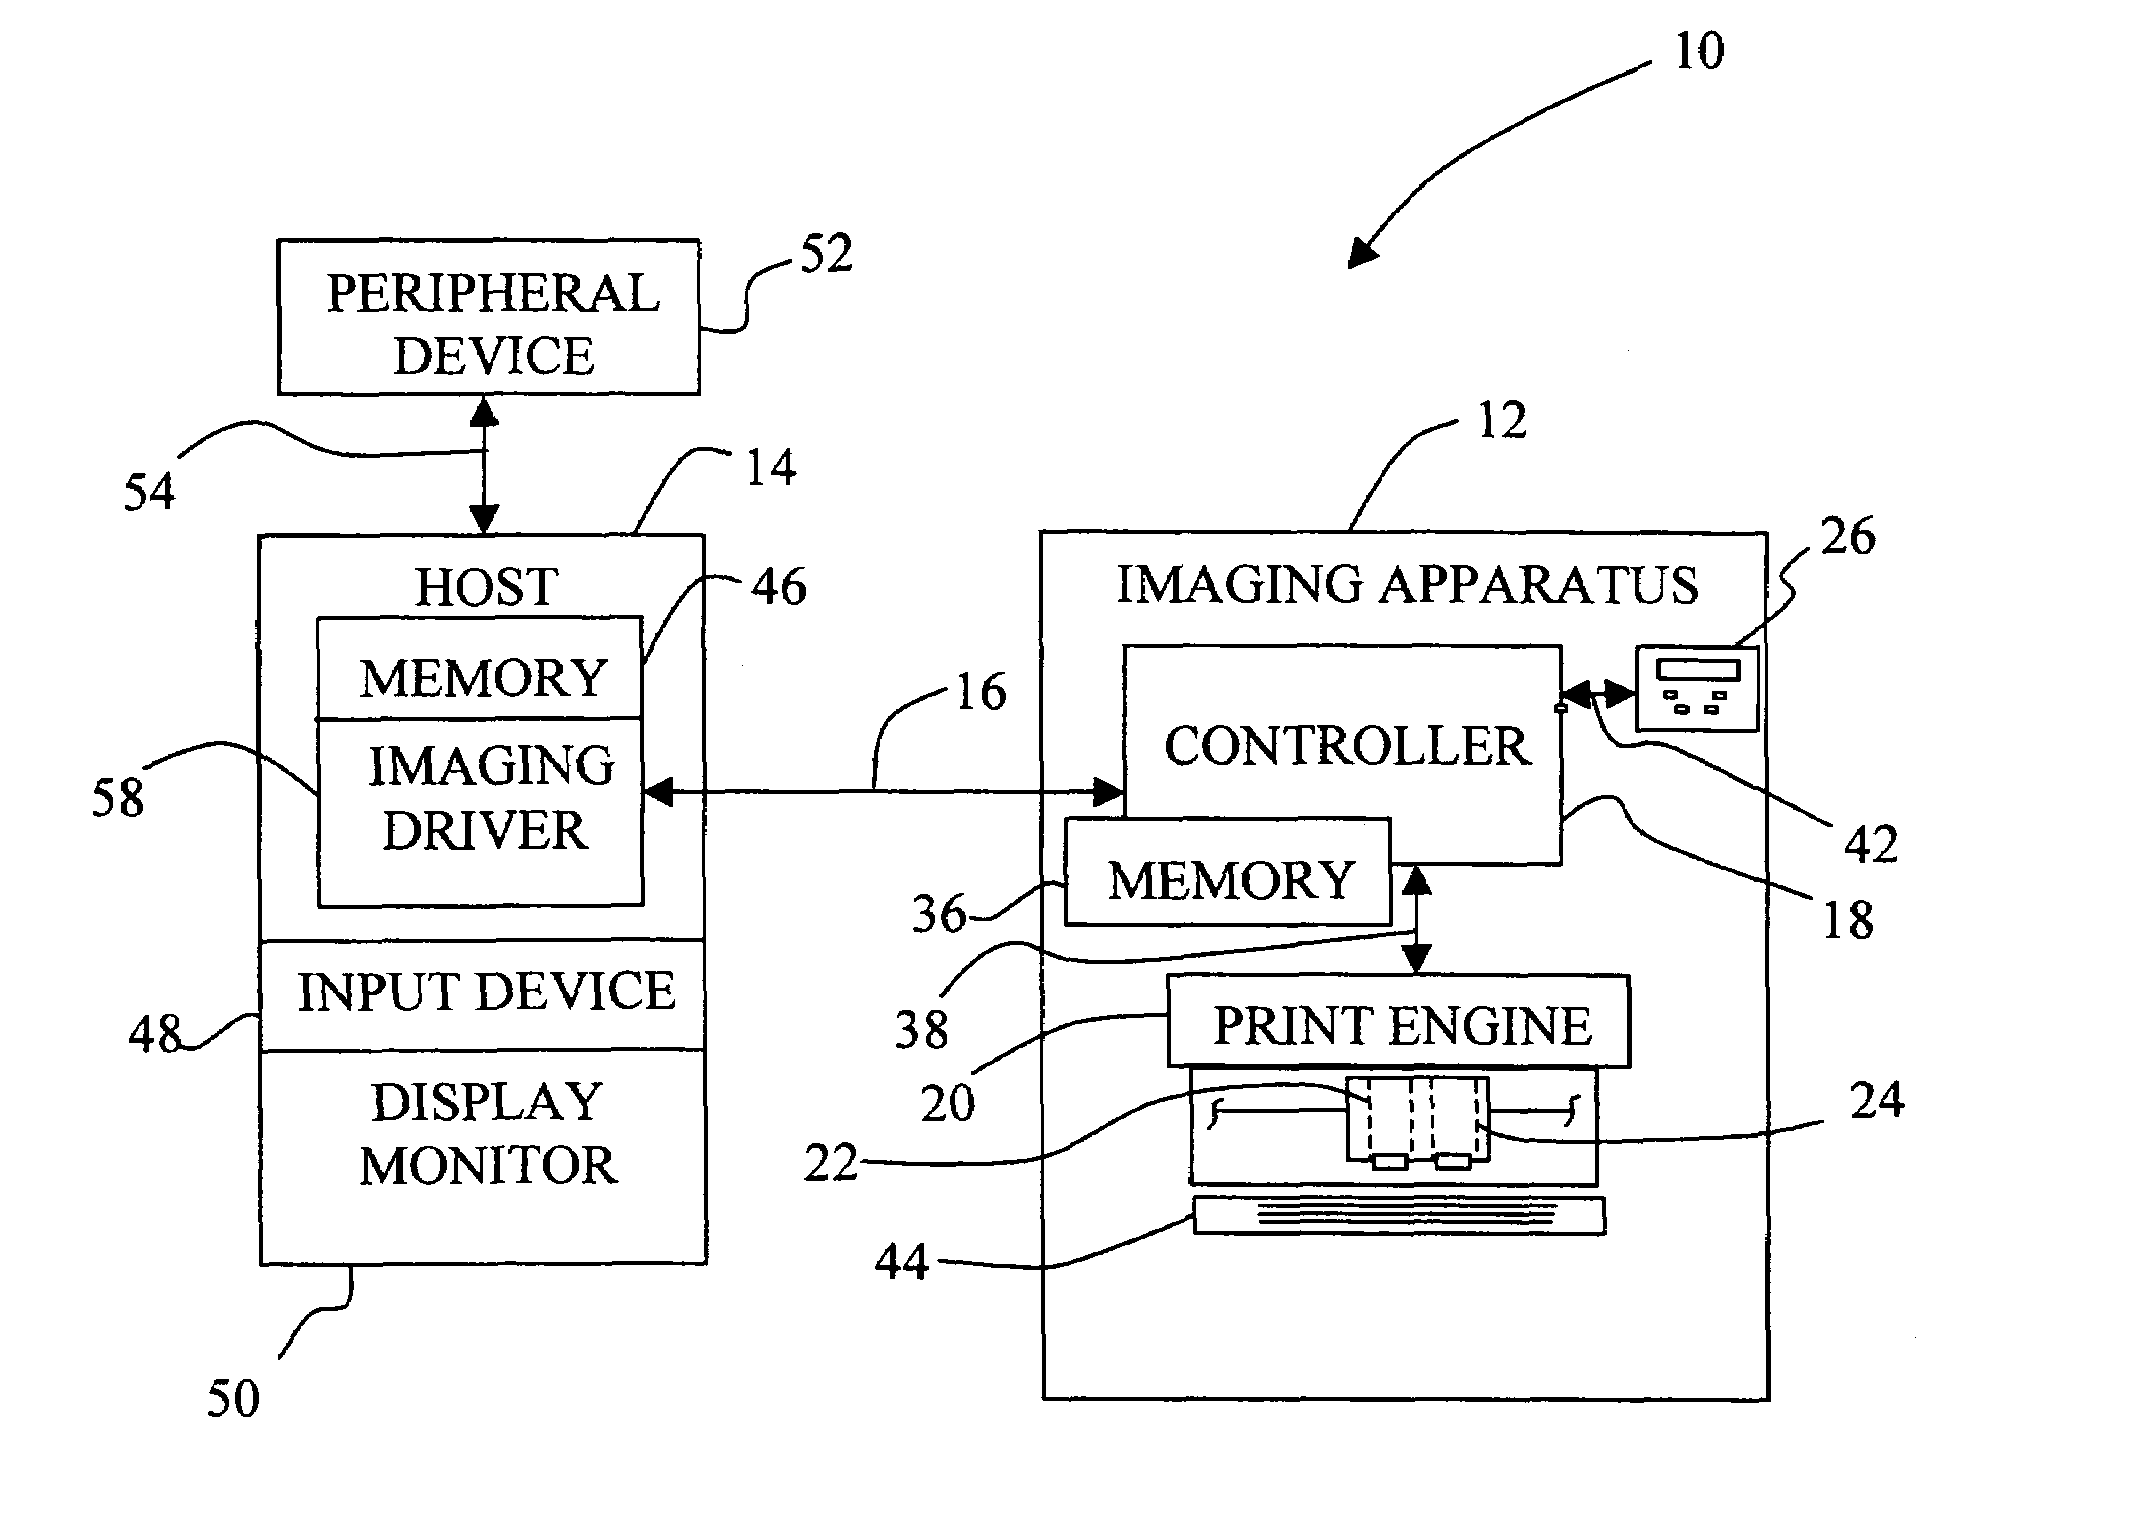 Method of selecting inks for use in imaging with an imaging apparatus